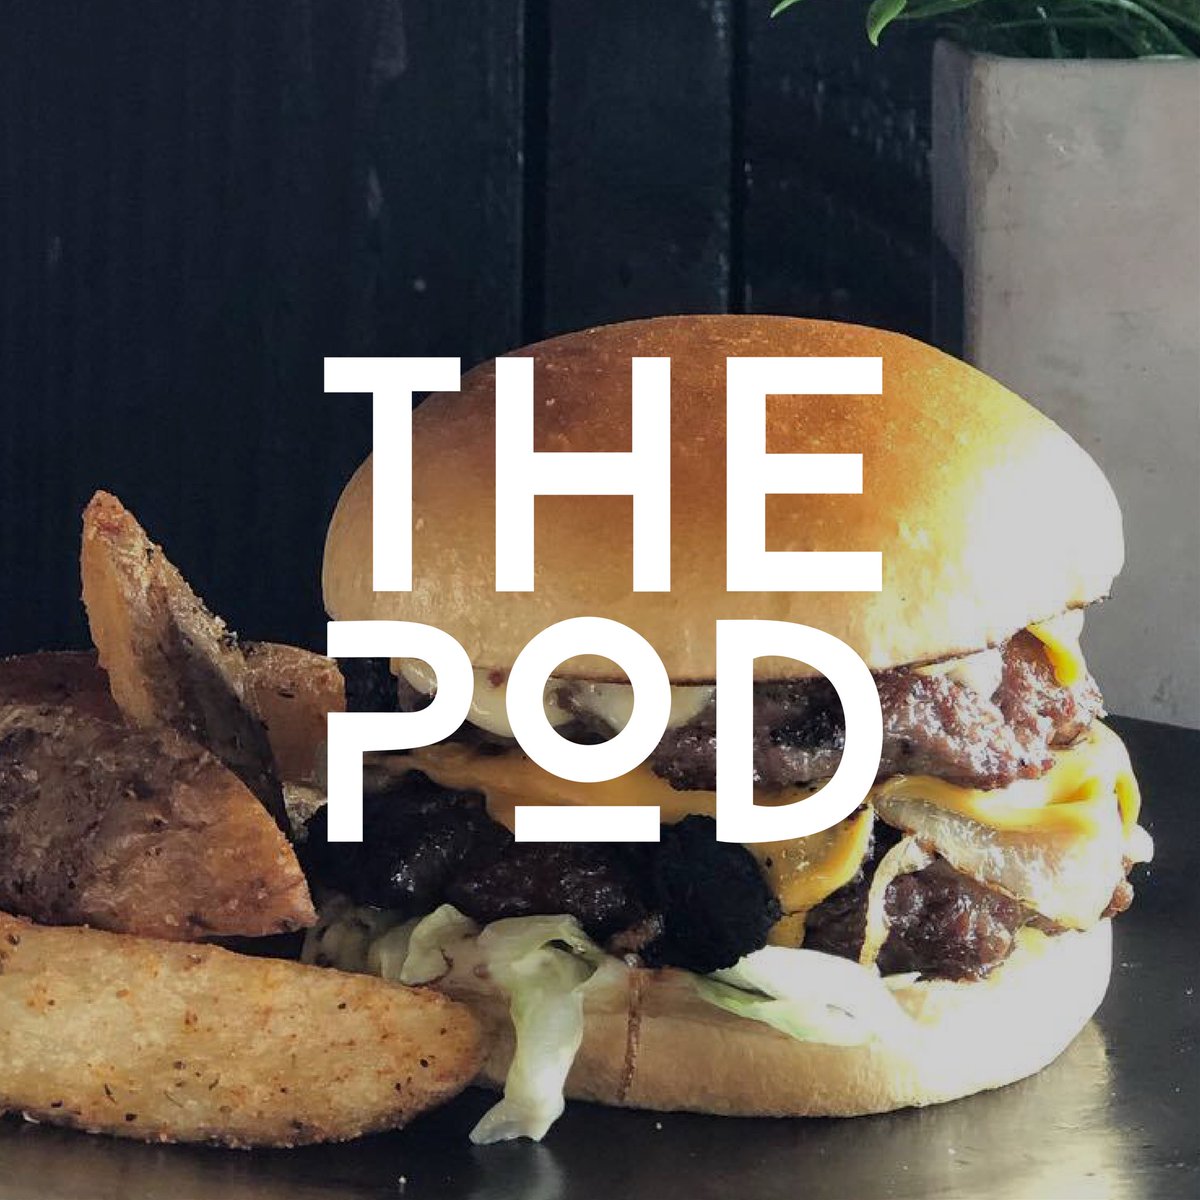 Next up at #Portstock2019 we’ve got @thepodnewport. Having opened on the banks of the river in 2017, The Pod have taken #Newport by storm with their stylish interior, classy cocktails & street food-style sharing boards. They’ll be serving up their tasty #burgers at #Portstock!